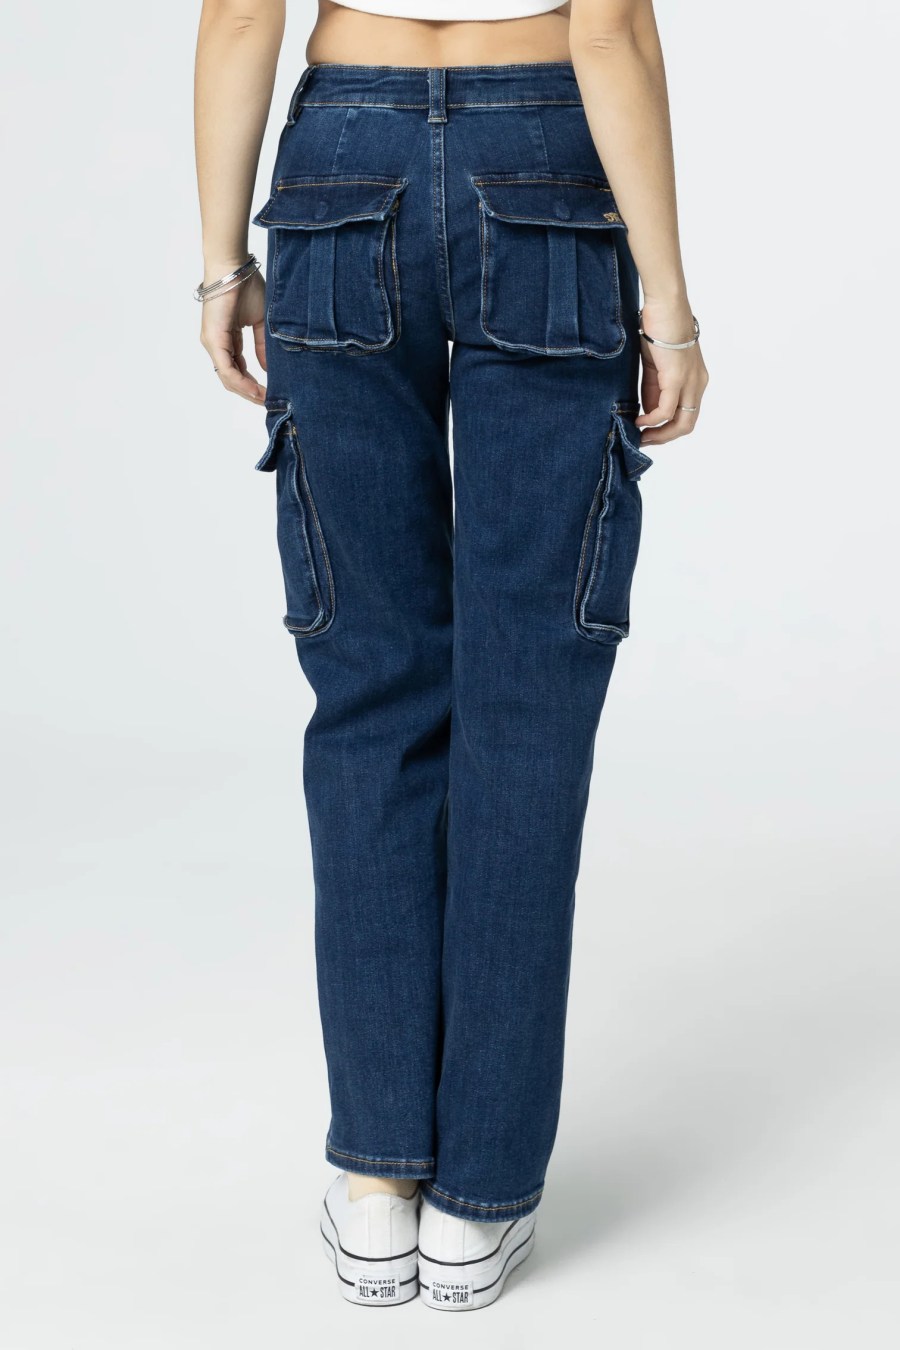 Denim cargo jeans continue to be a wardrobe staple